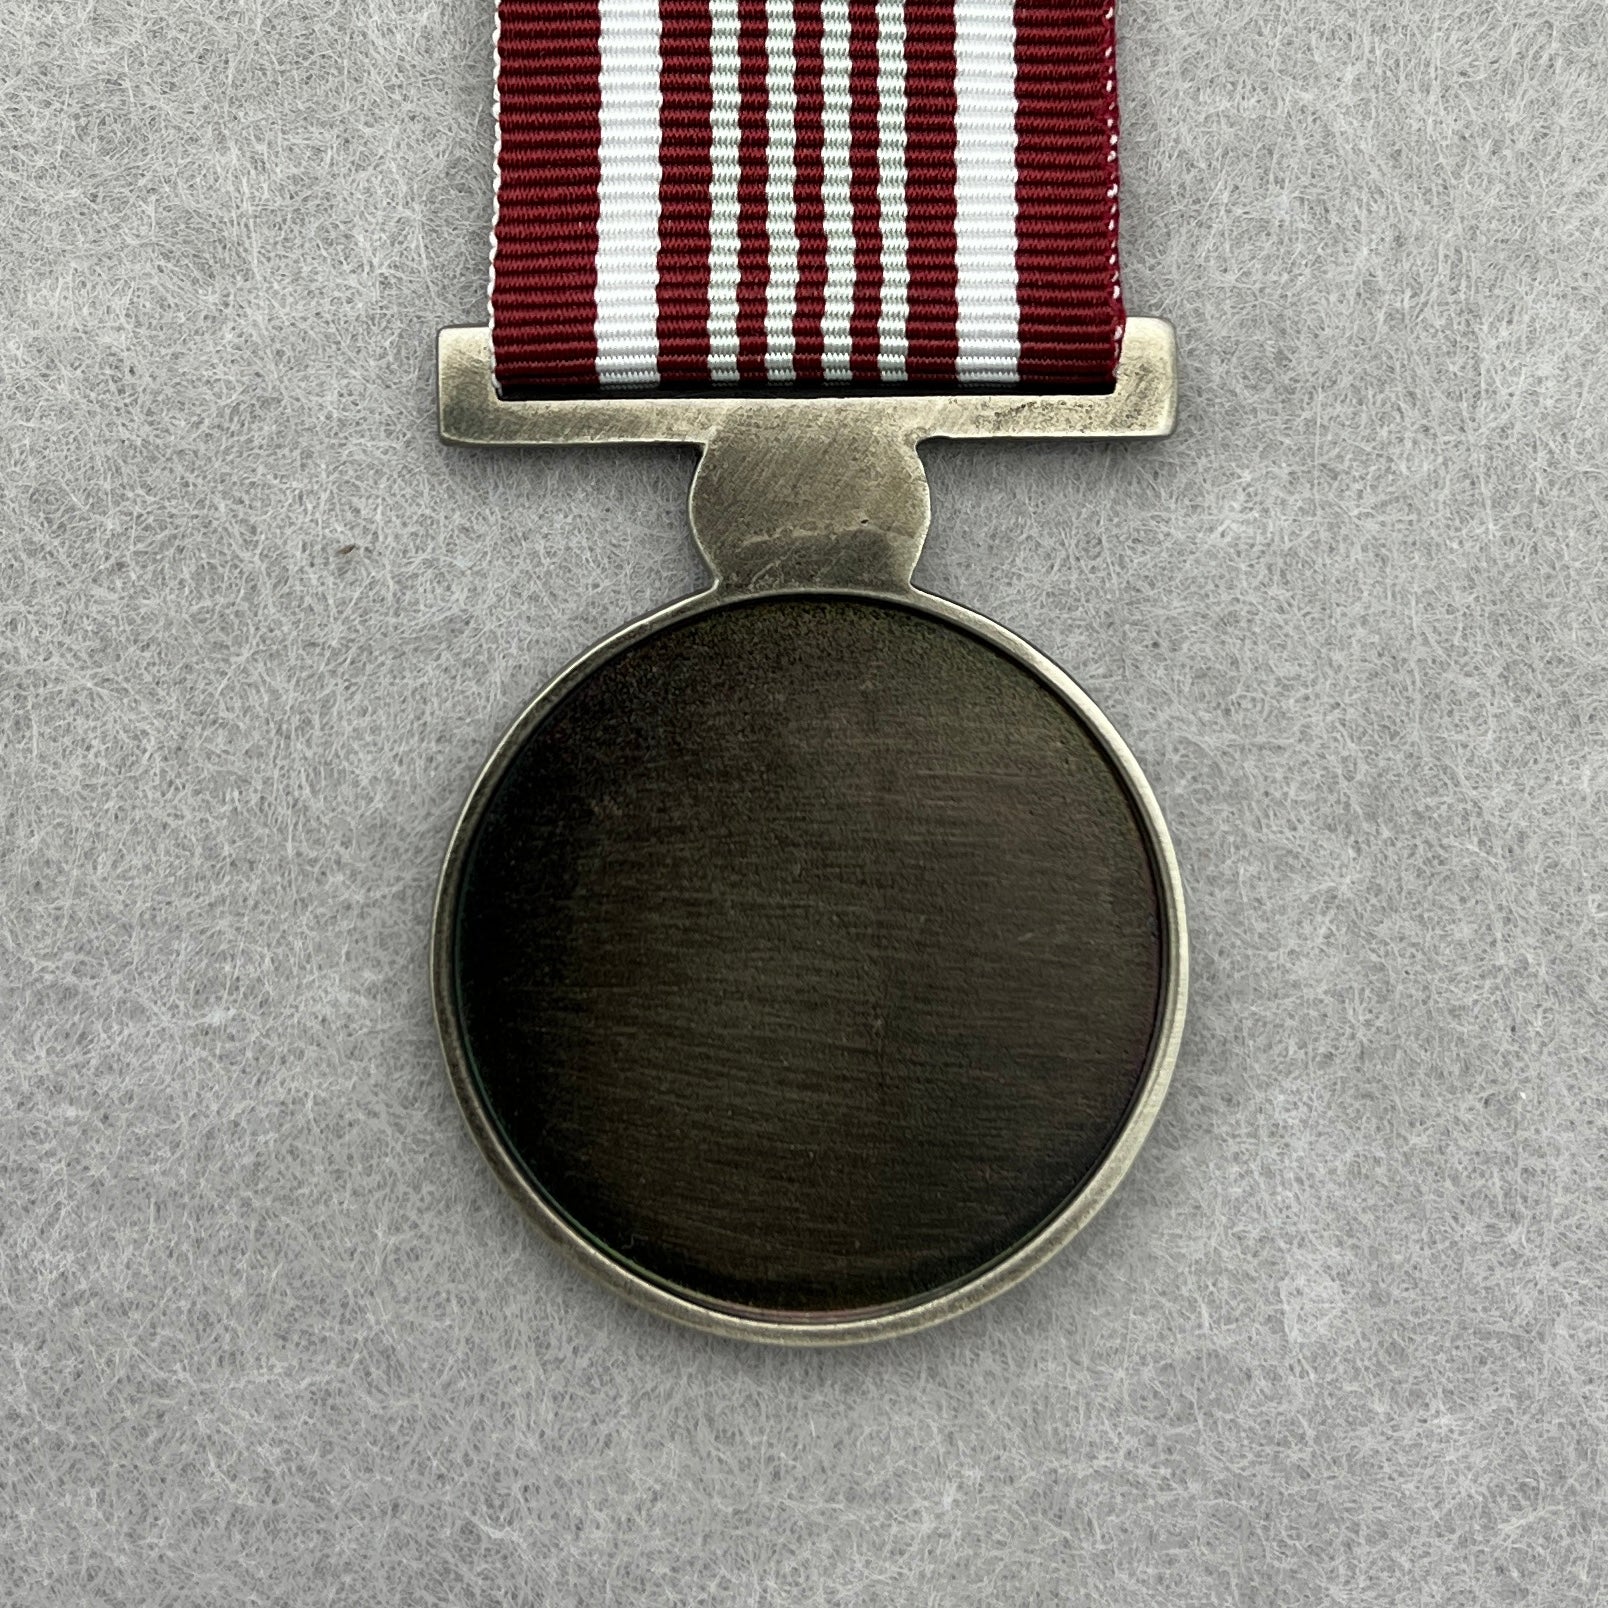 NT Police, Fire & Emergency Services COVID-19 Service Medal - Foxhole Medals